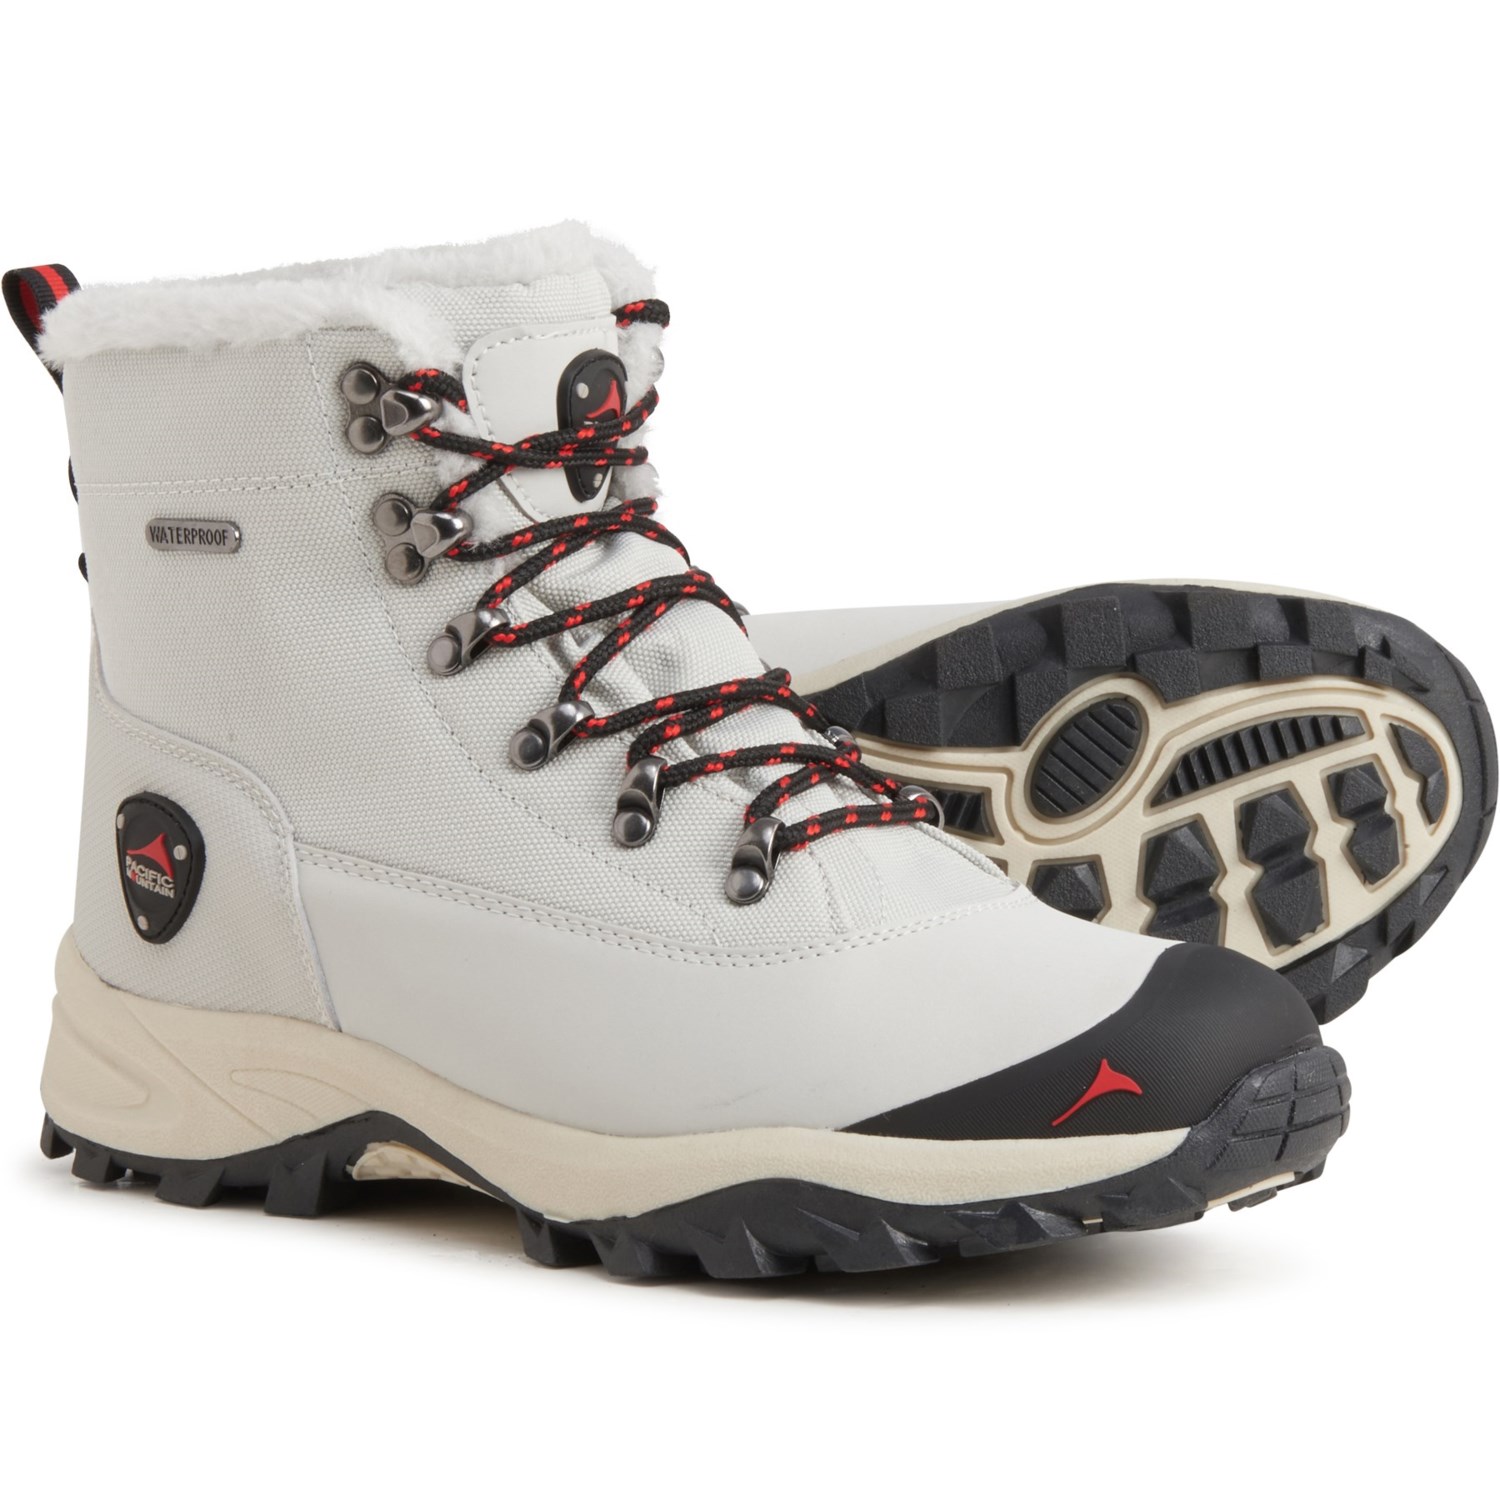 Pacific Alpine Winter Hiking Boots - Save 67%